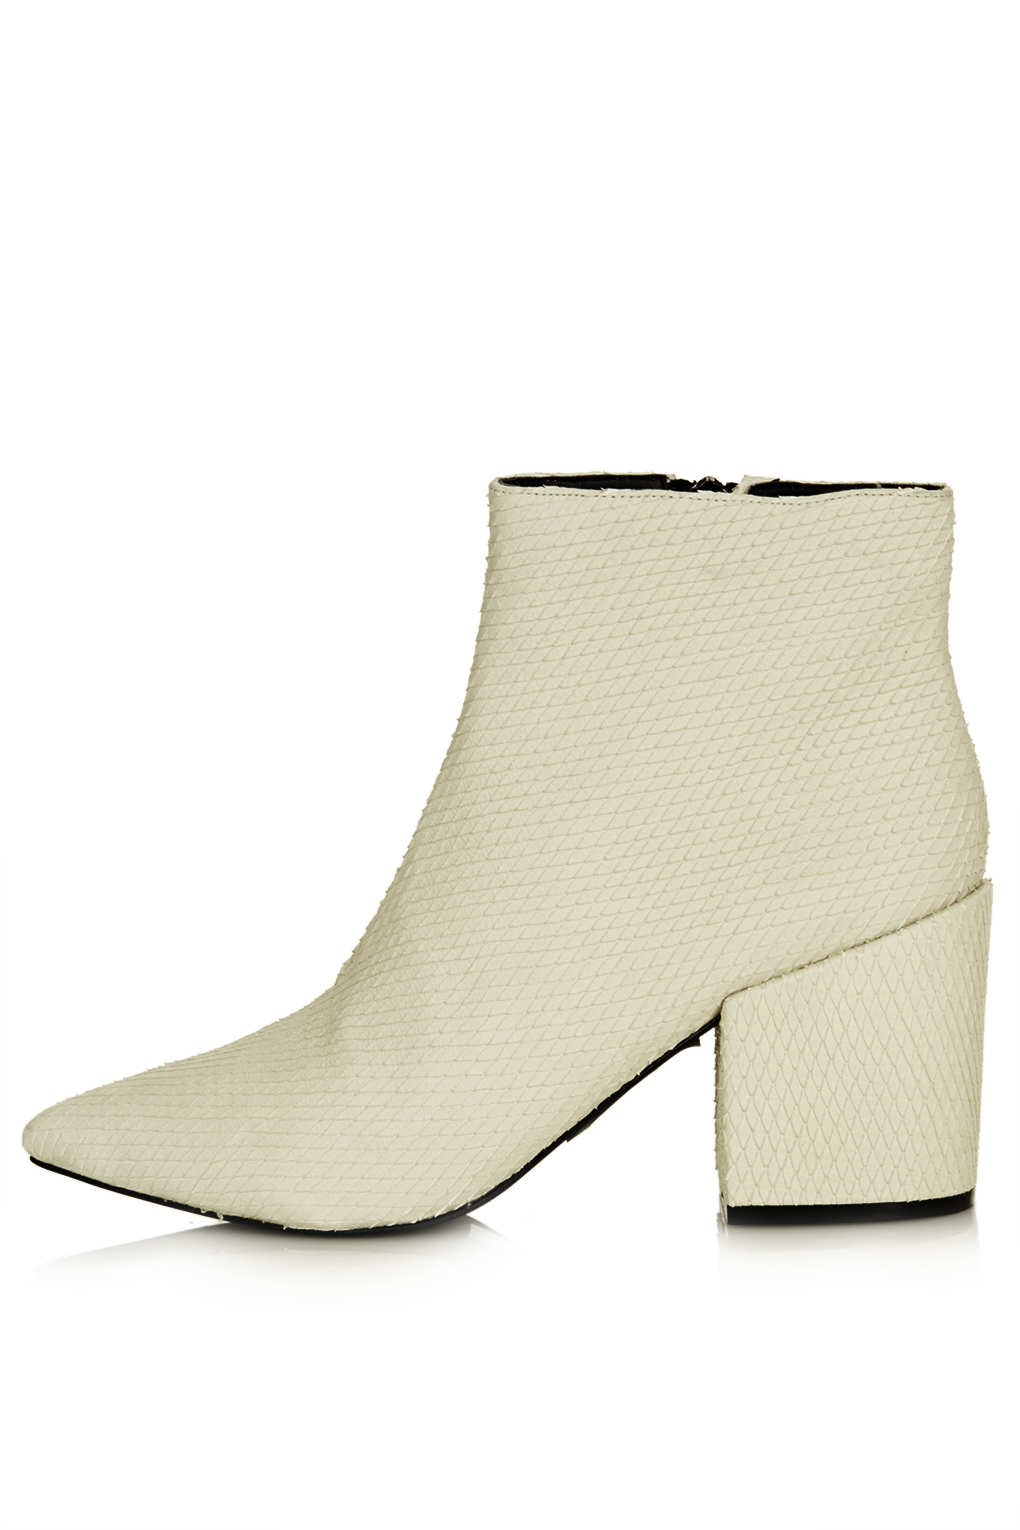 topshop white booties